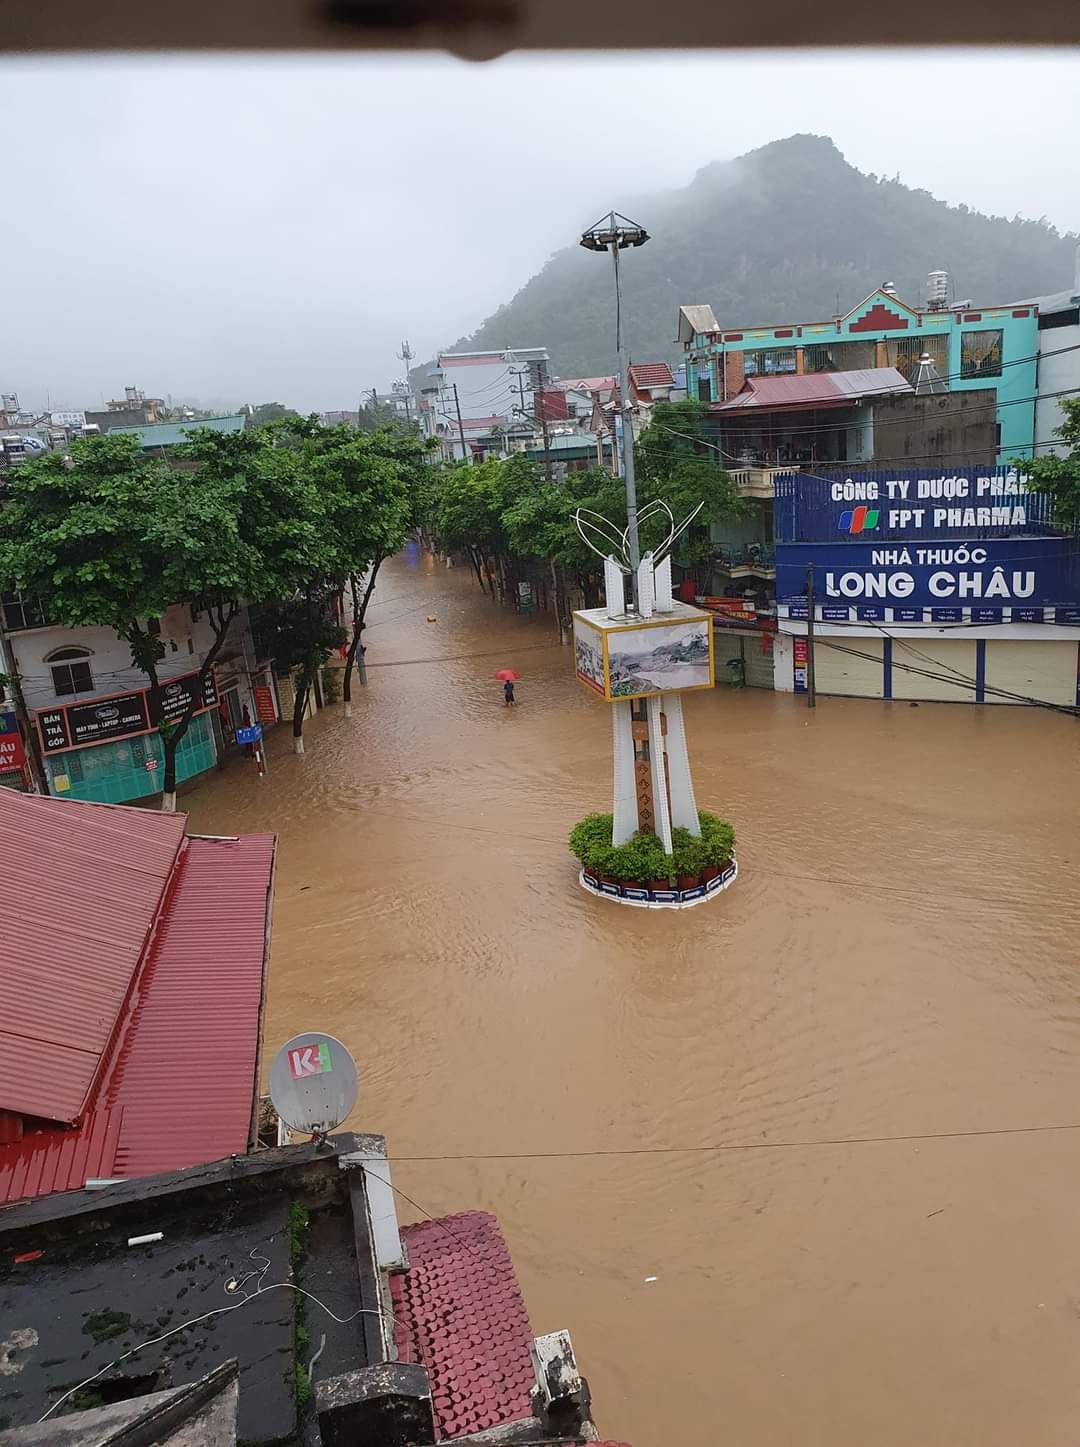 Son La mountain town was heavily flooded after heavy rain, soldiers evacuated people in torrential flood water - Photo 1.